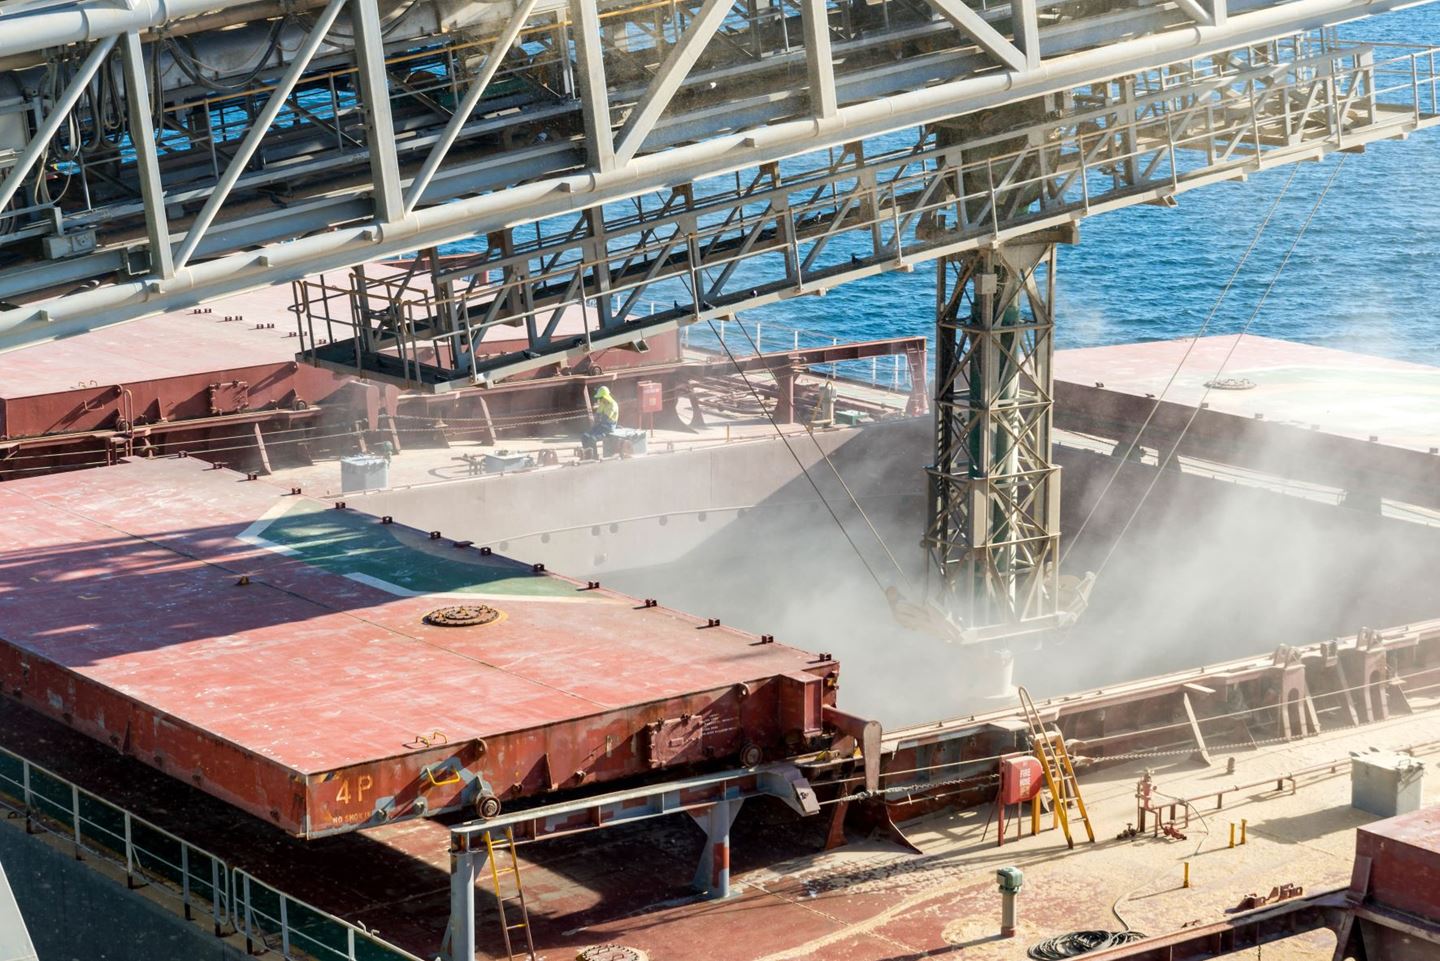 A shiploading structure discharges grain into the open hatch of a ship, grain dust is flying everywhere